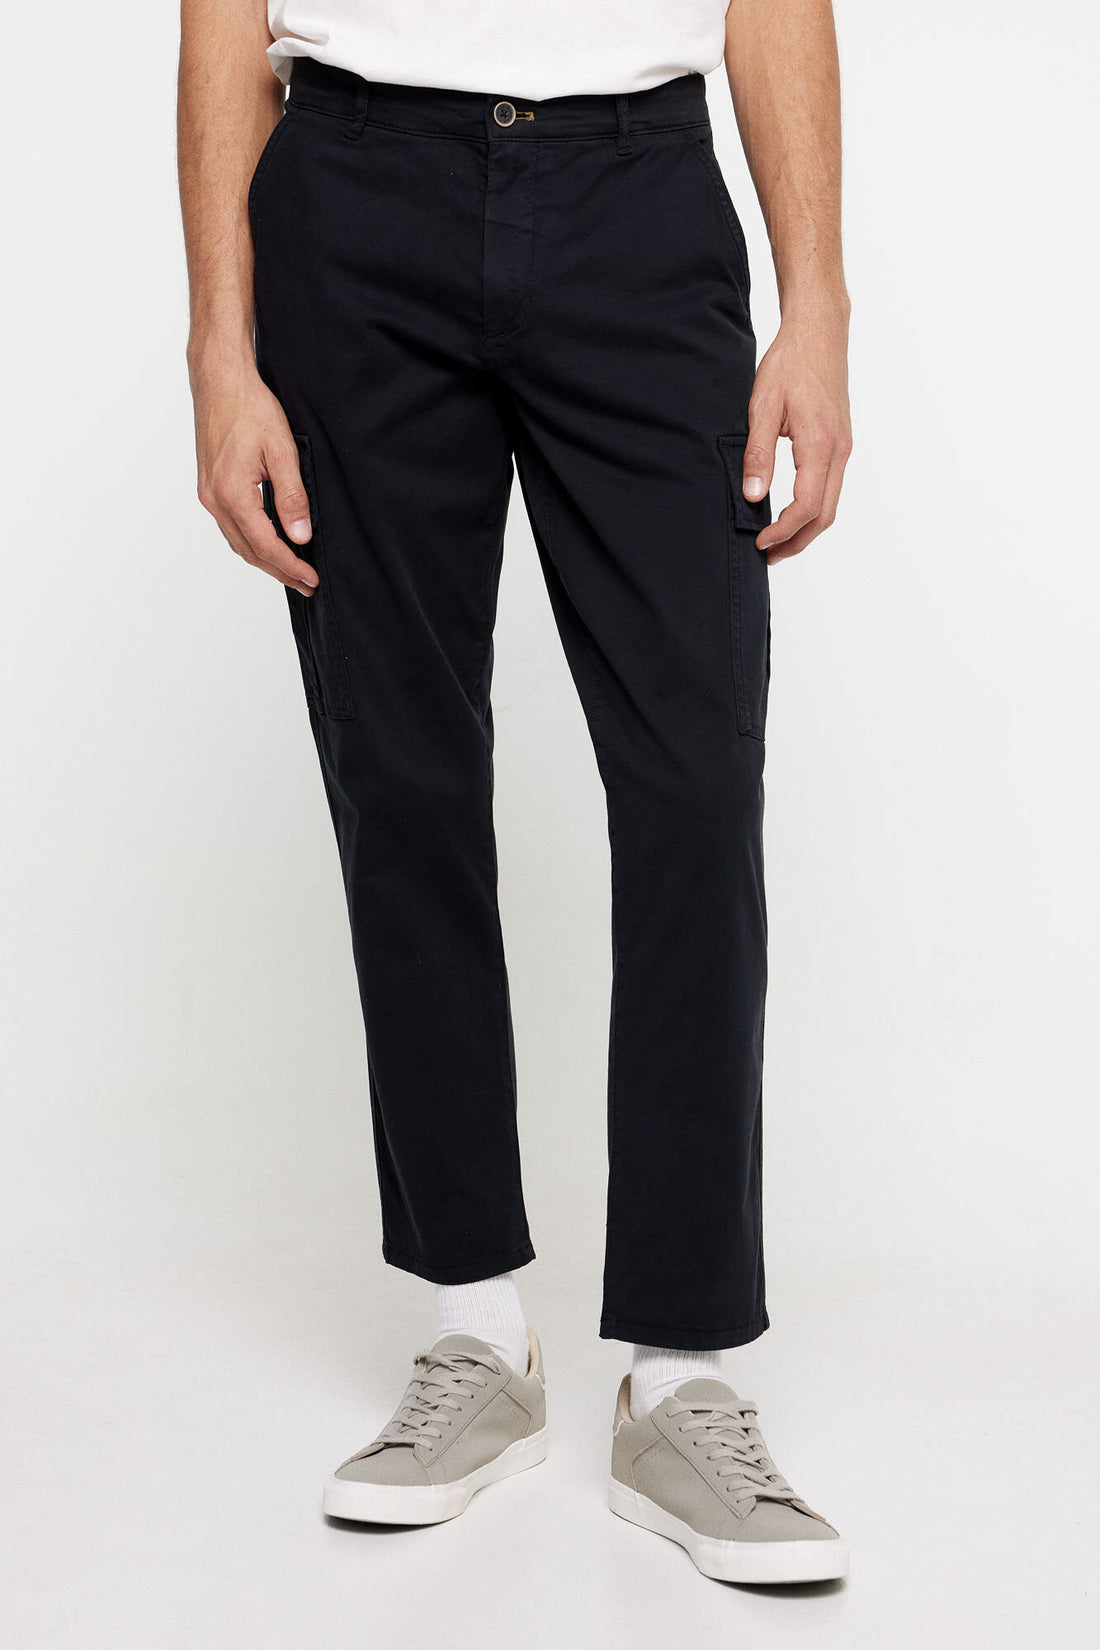 Cargo Style Chino Trousers_1557246_01_02